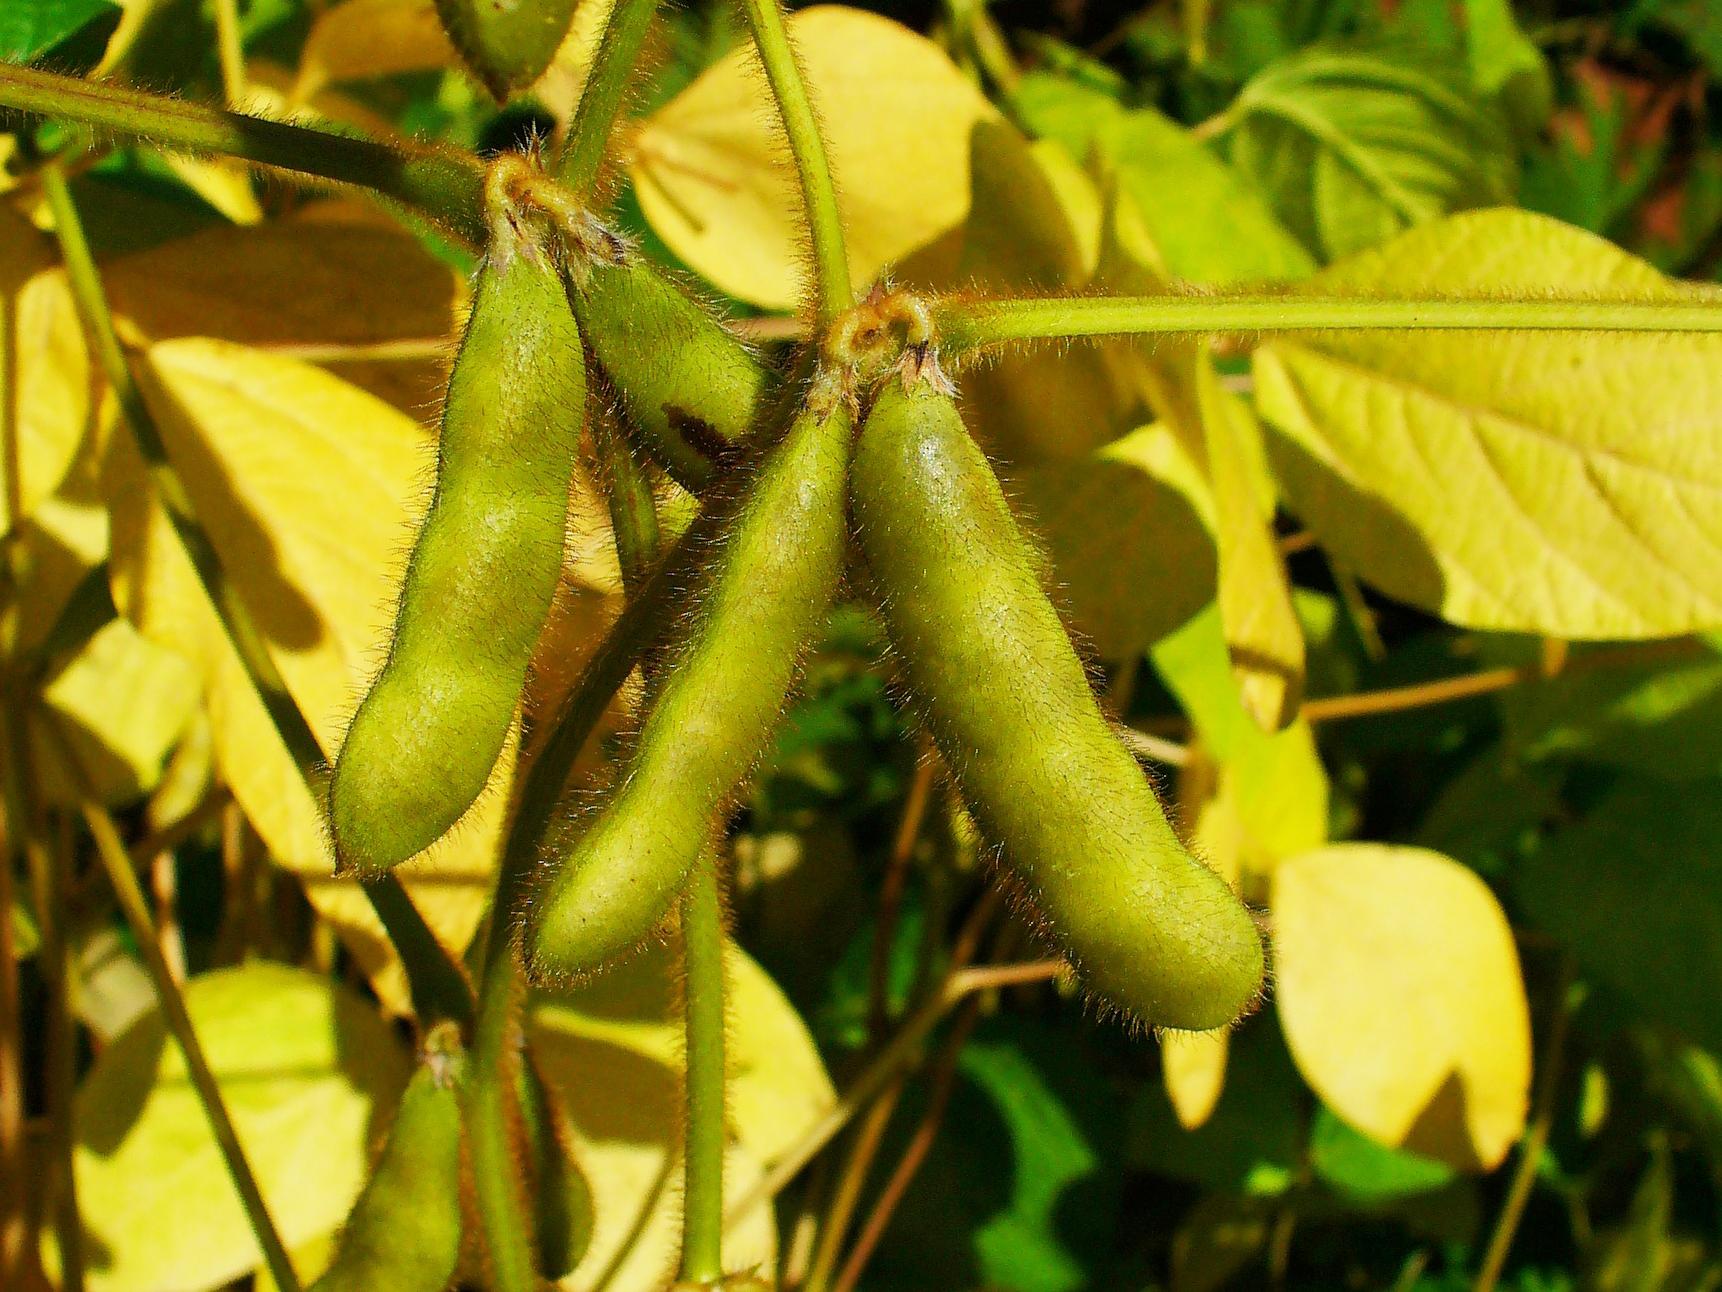 Lime-green buds, lime-green stems with green pods and yellow leaves